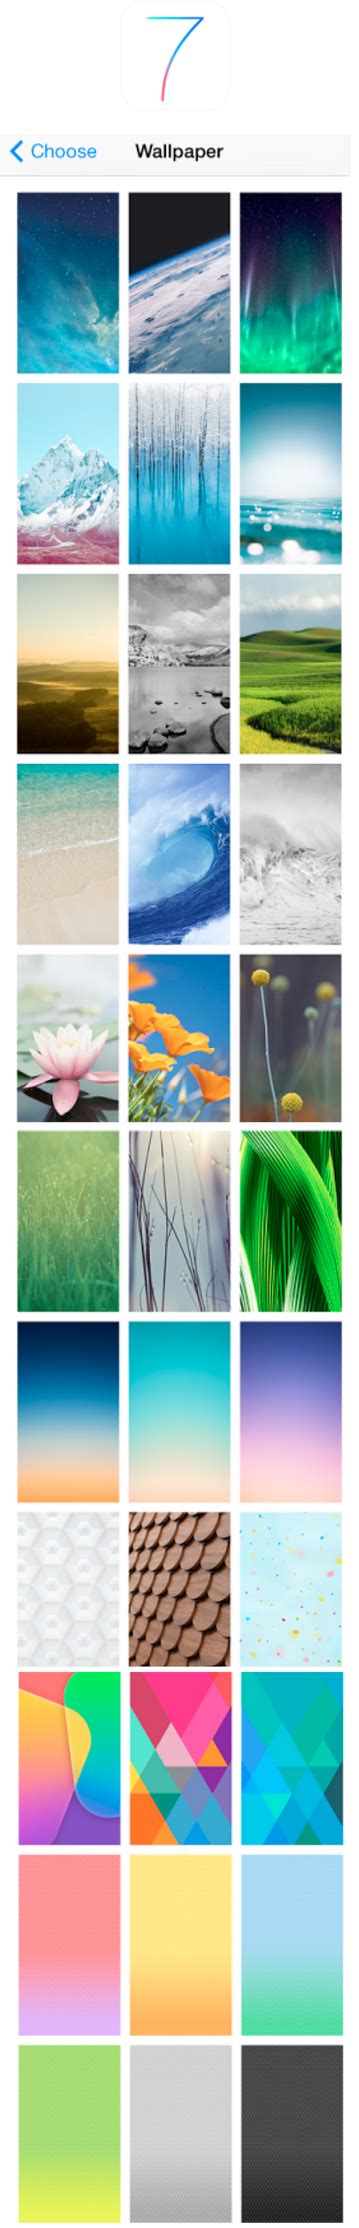 Ios 7 Ipad Wallpaper Bundle Pt 1 By Cptneclectic On Deviantart